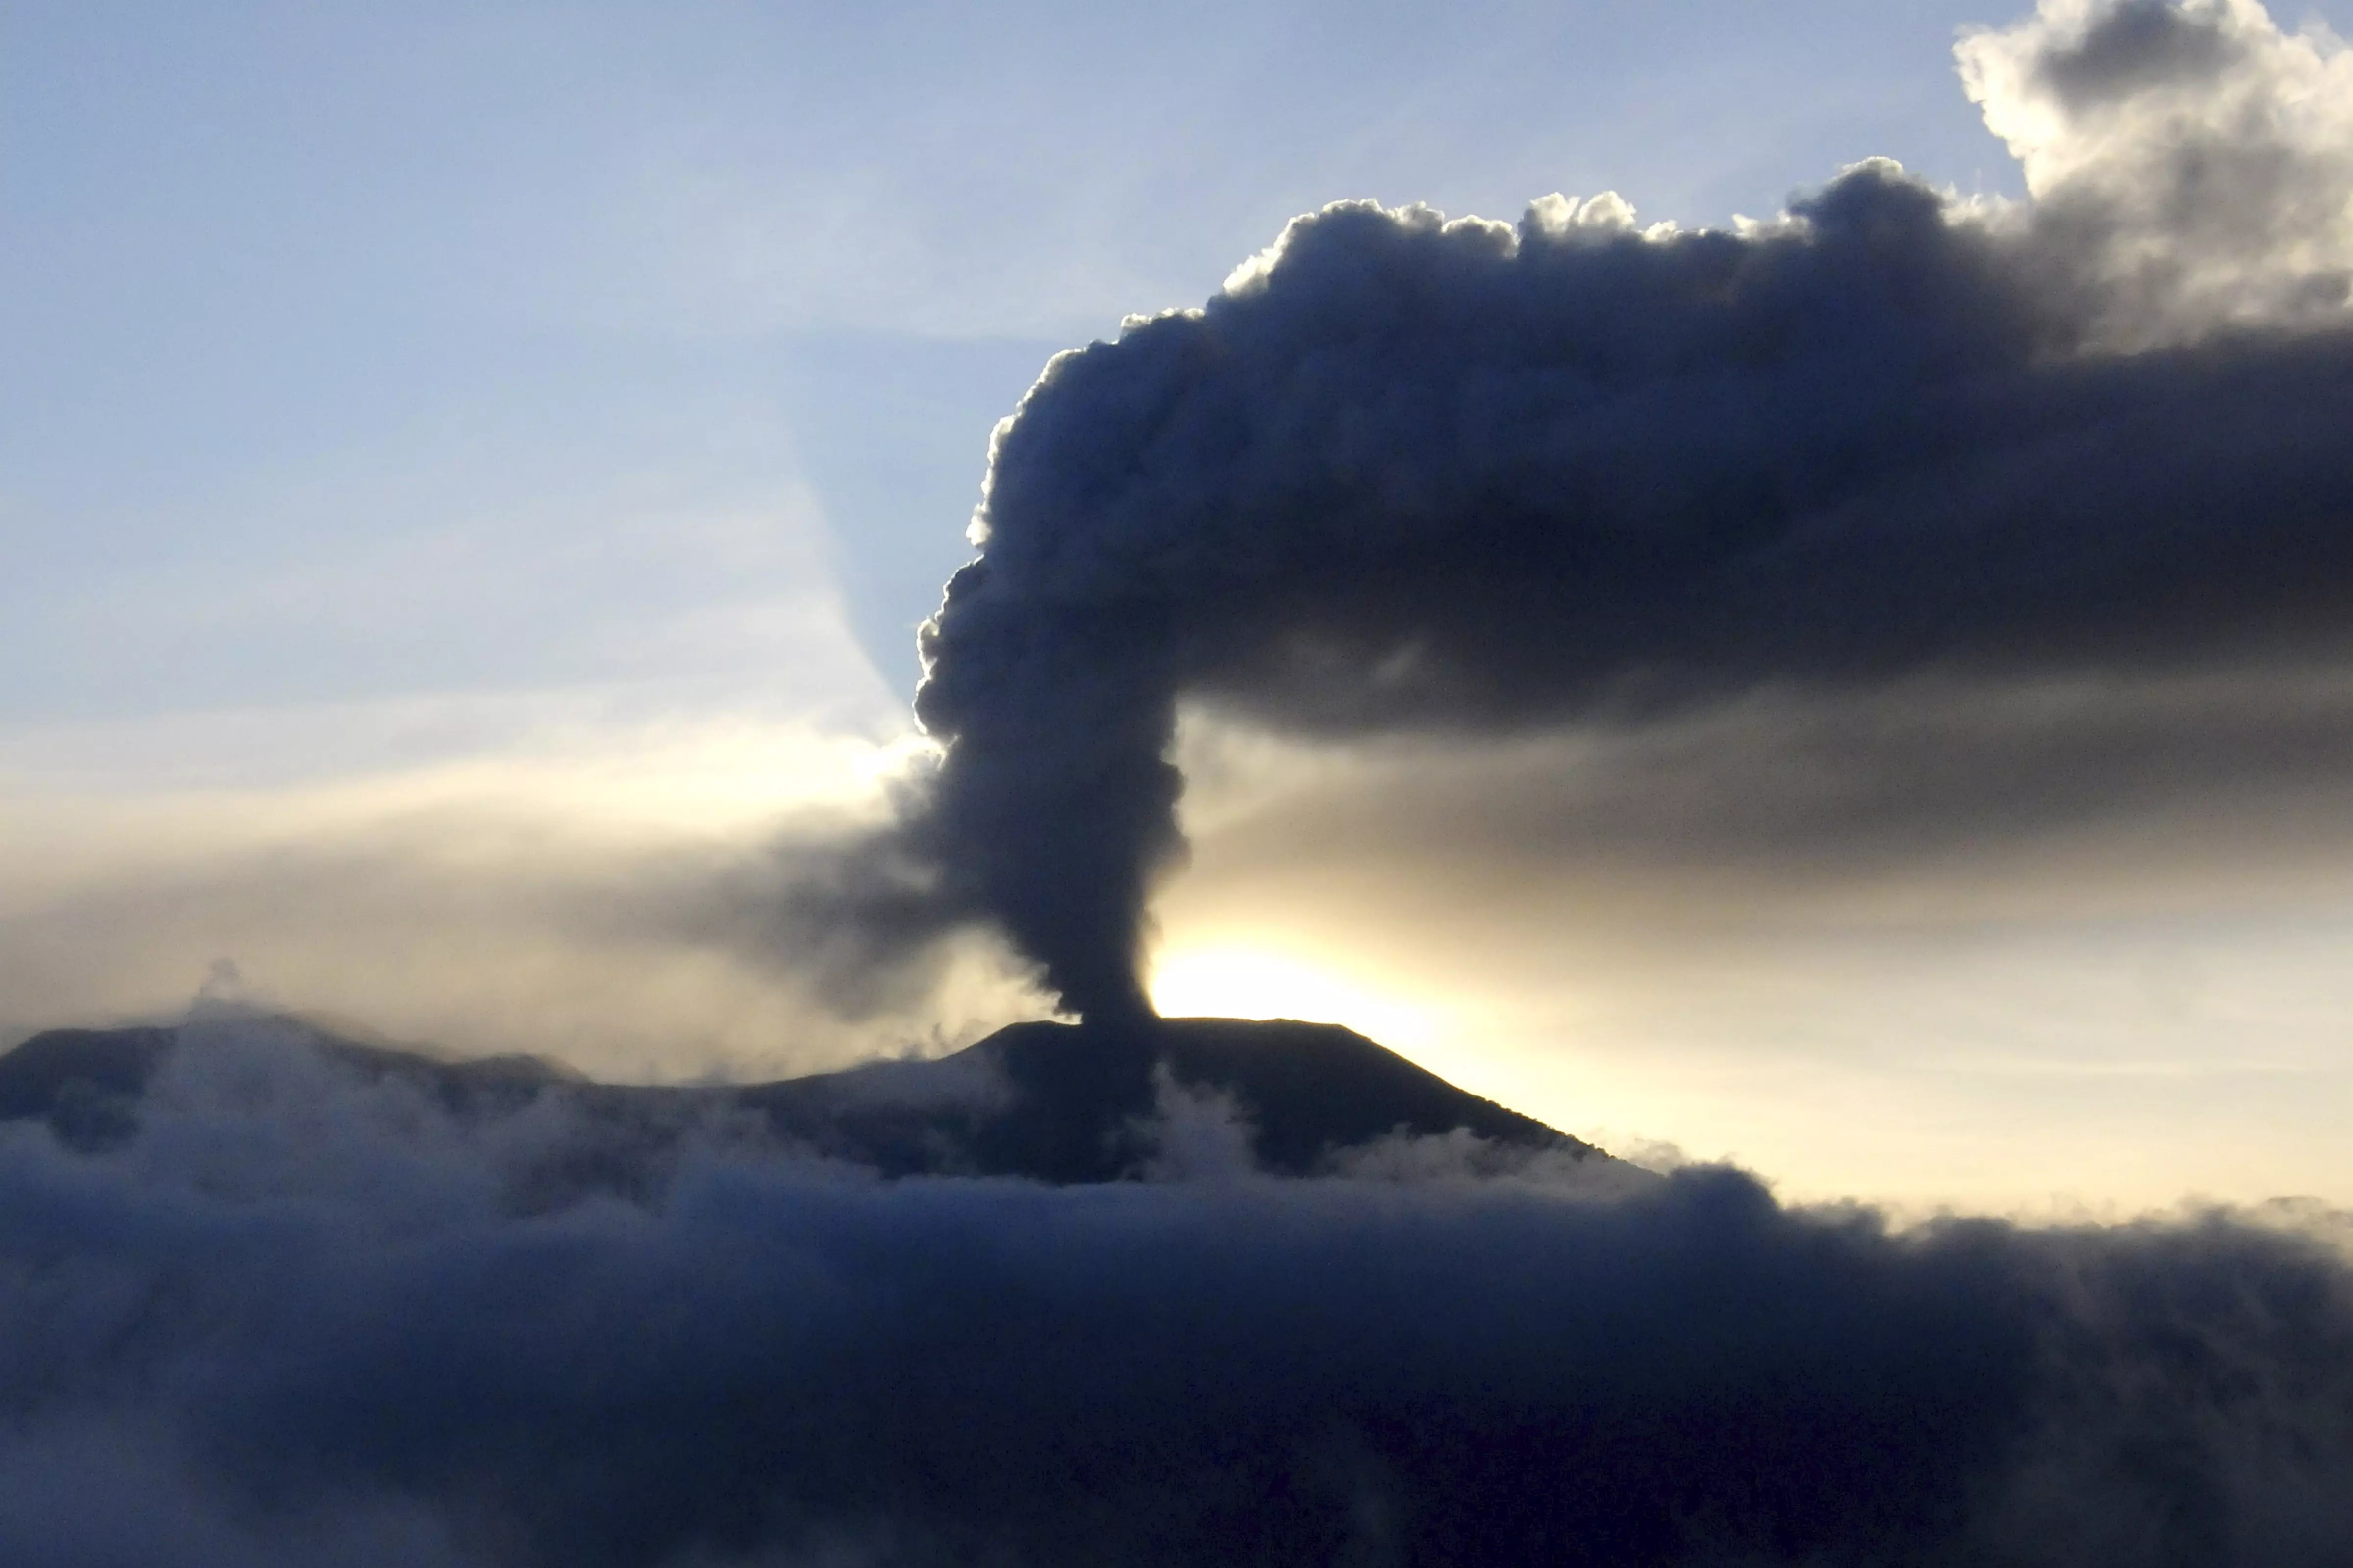 Indonesia: More bodies found after Mount Marapi eruption, raising apparent toll to 23